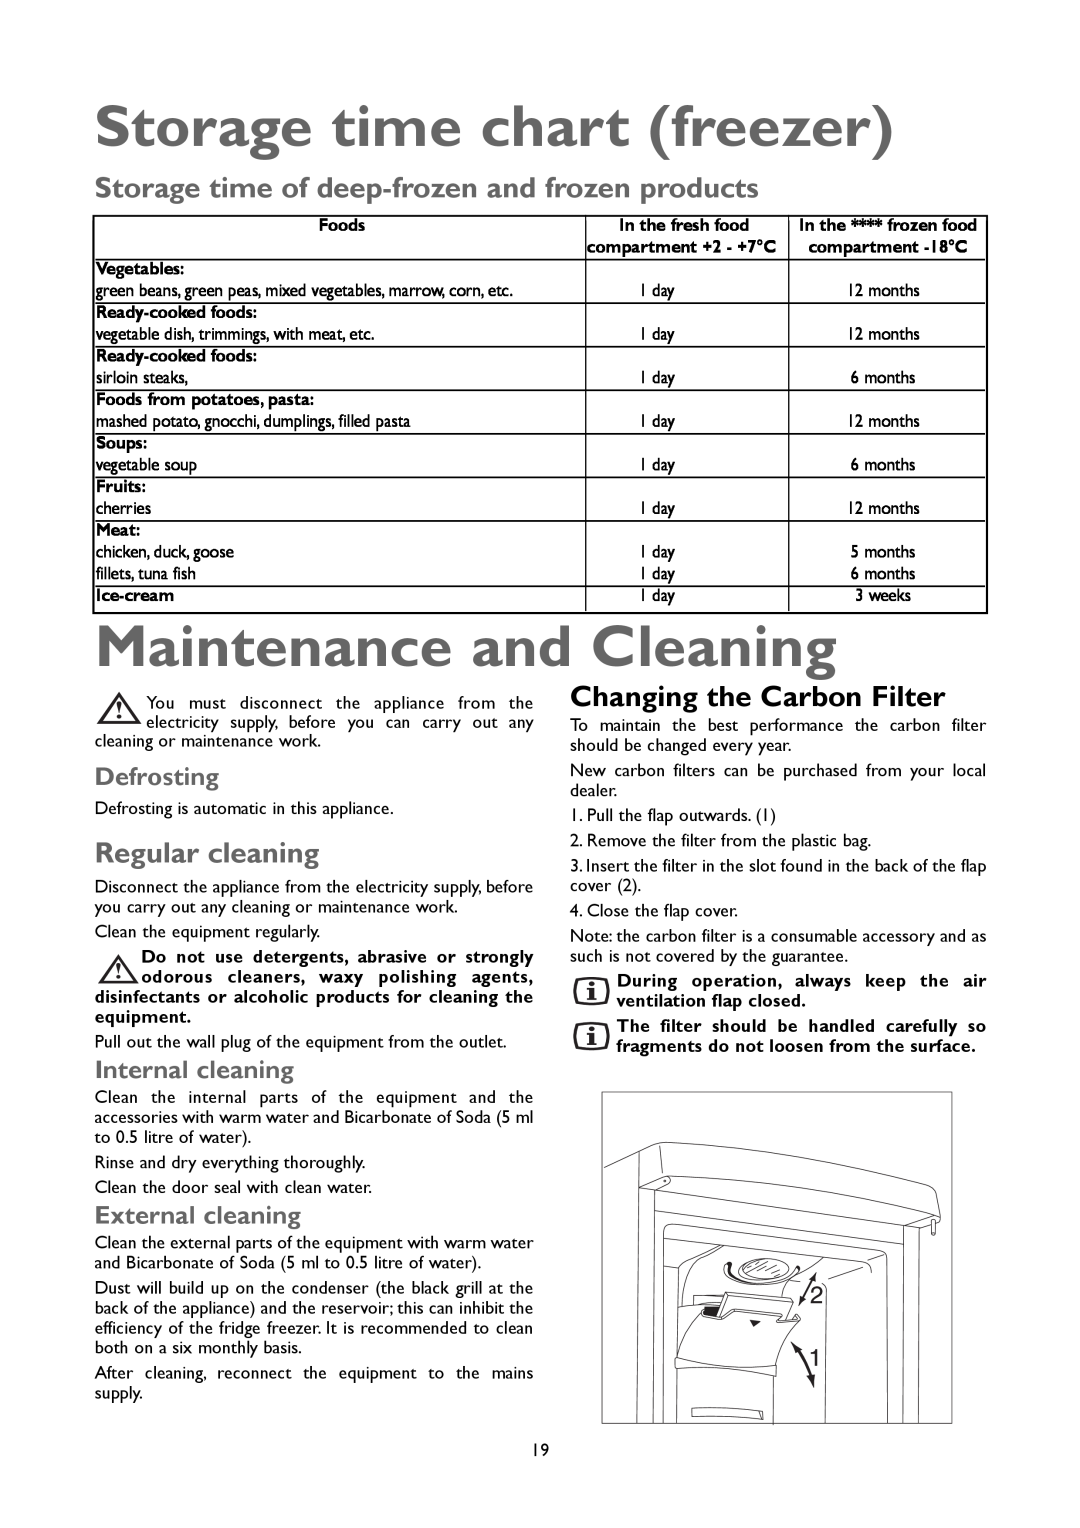 John Lewis JLFFW2005 Storage time chart freezer, Maintenance and Cleaning, Storage time of deep-frozenand frozen products 